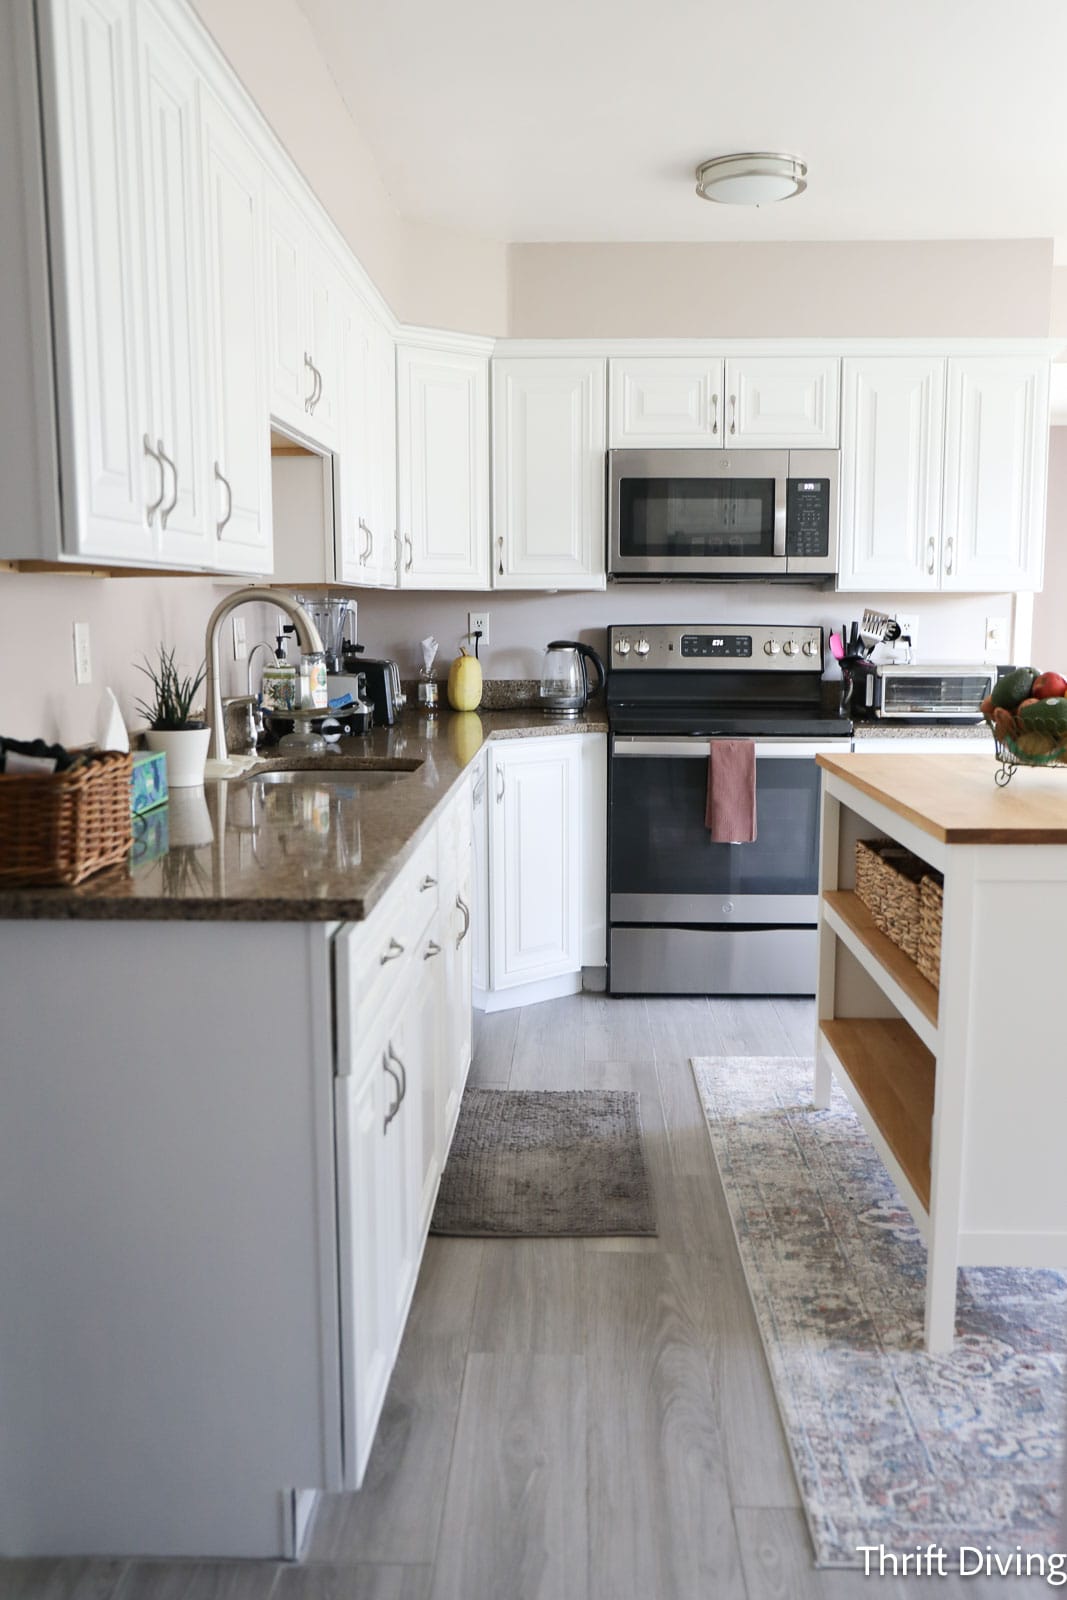 white kitchen cabinets with gray tile floor